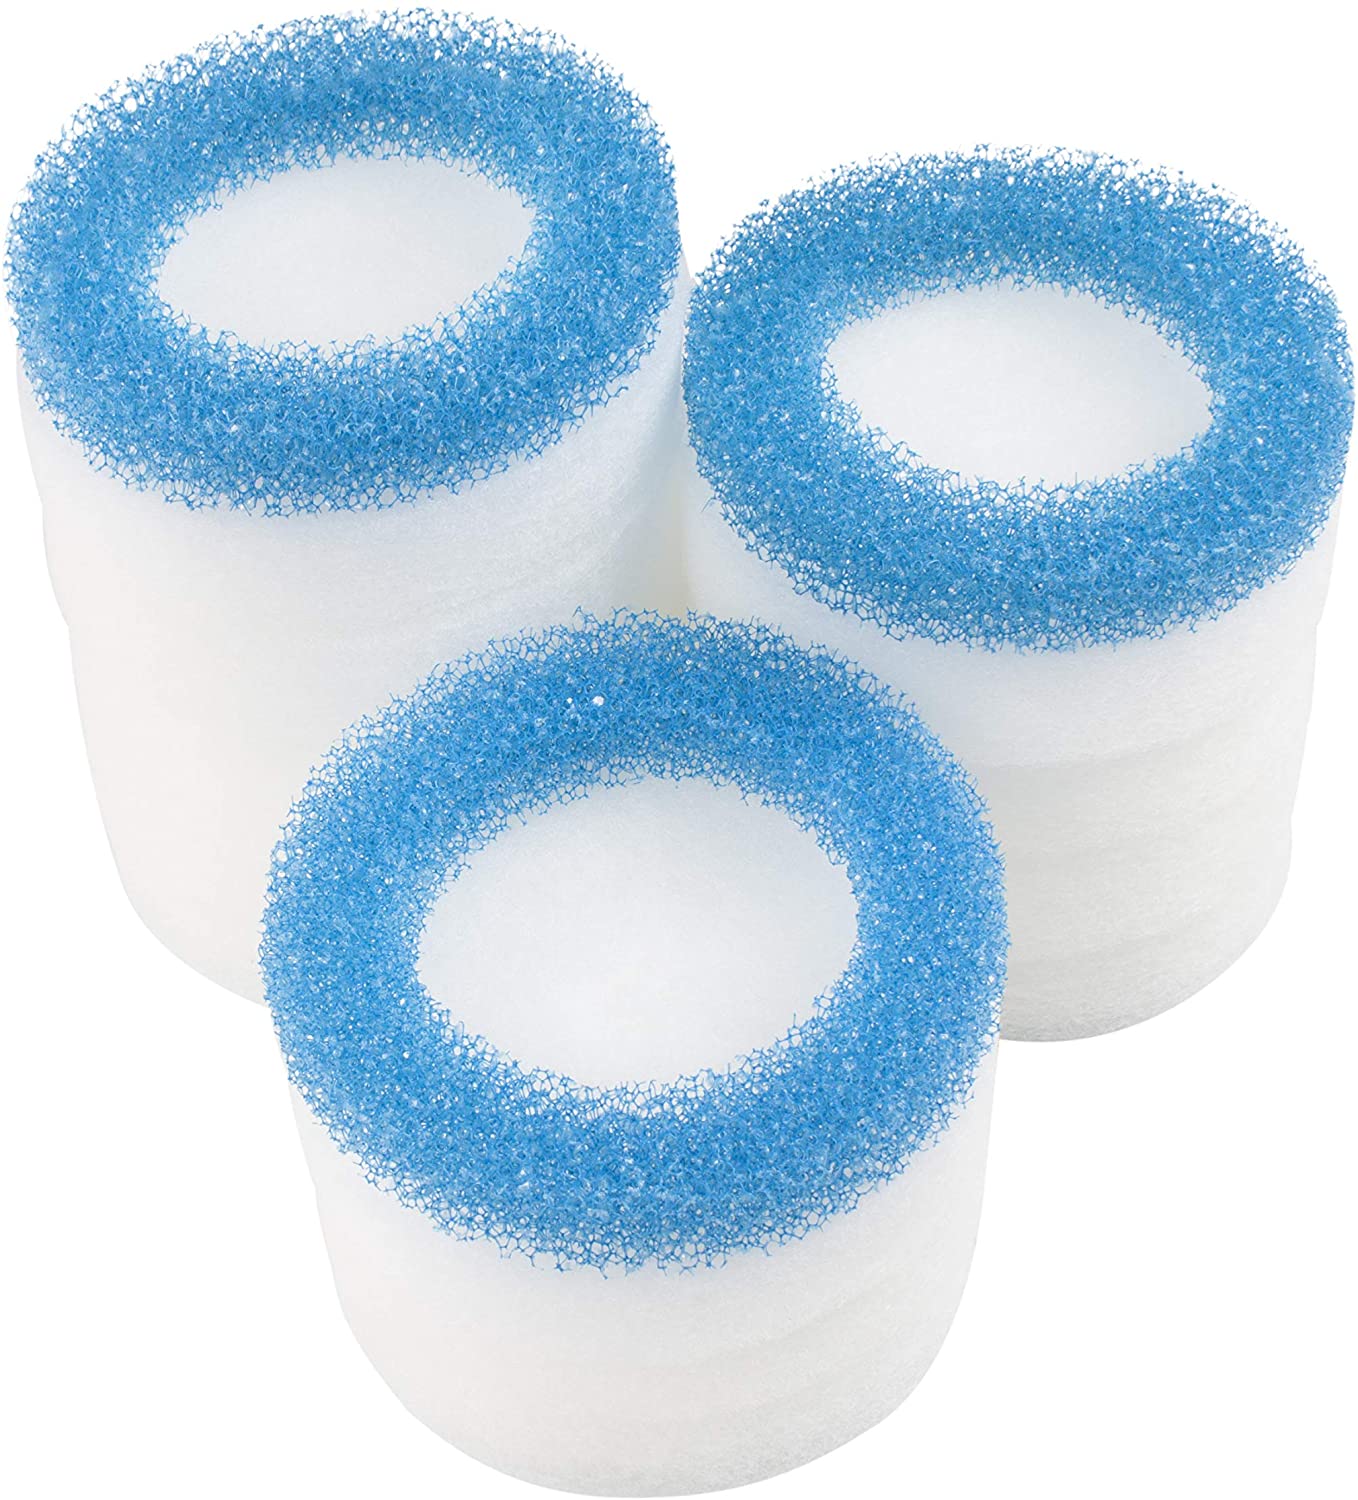 LTWHOME Fine and Coarse Foam Filter Pad Fit for 2616320 Ecco Pro 130/200 / 300 (Pack of 3 Sets)